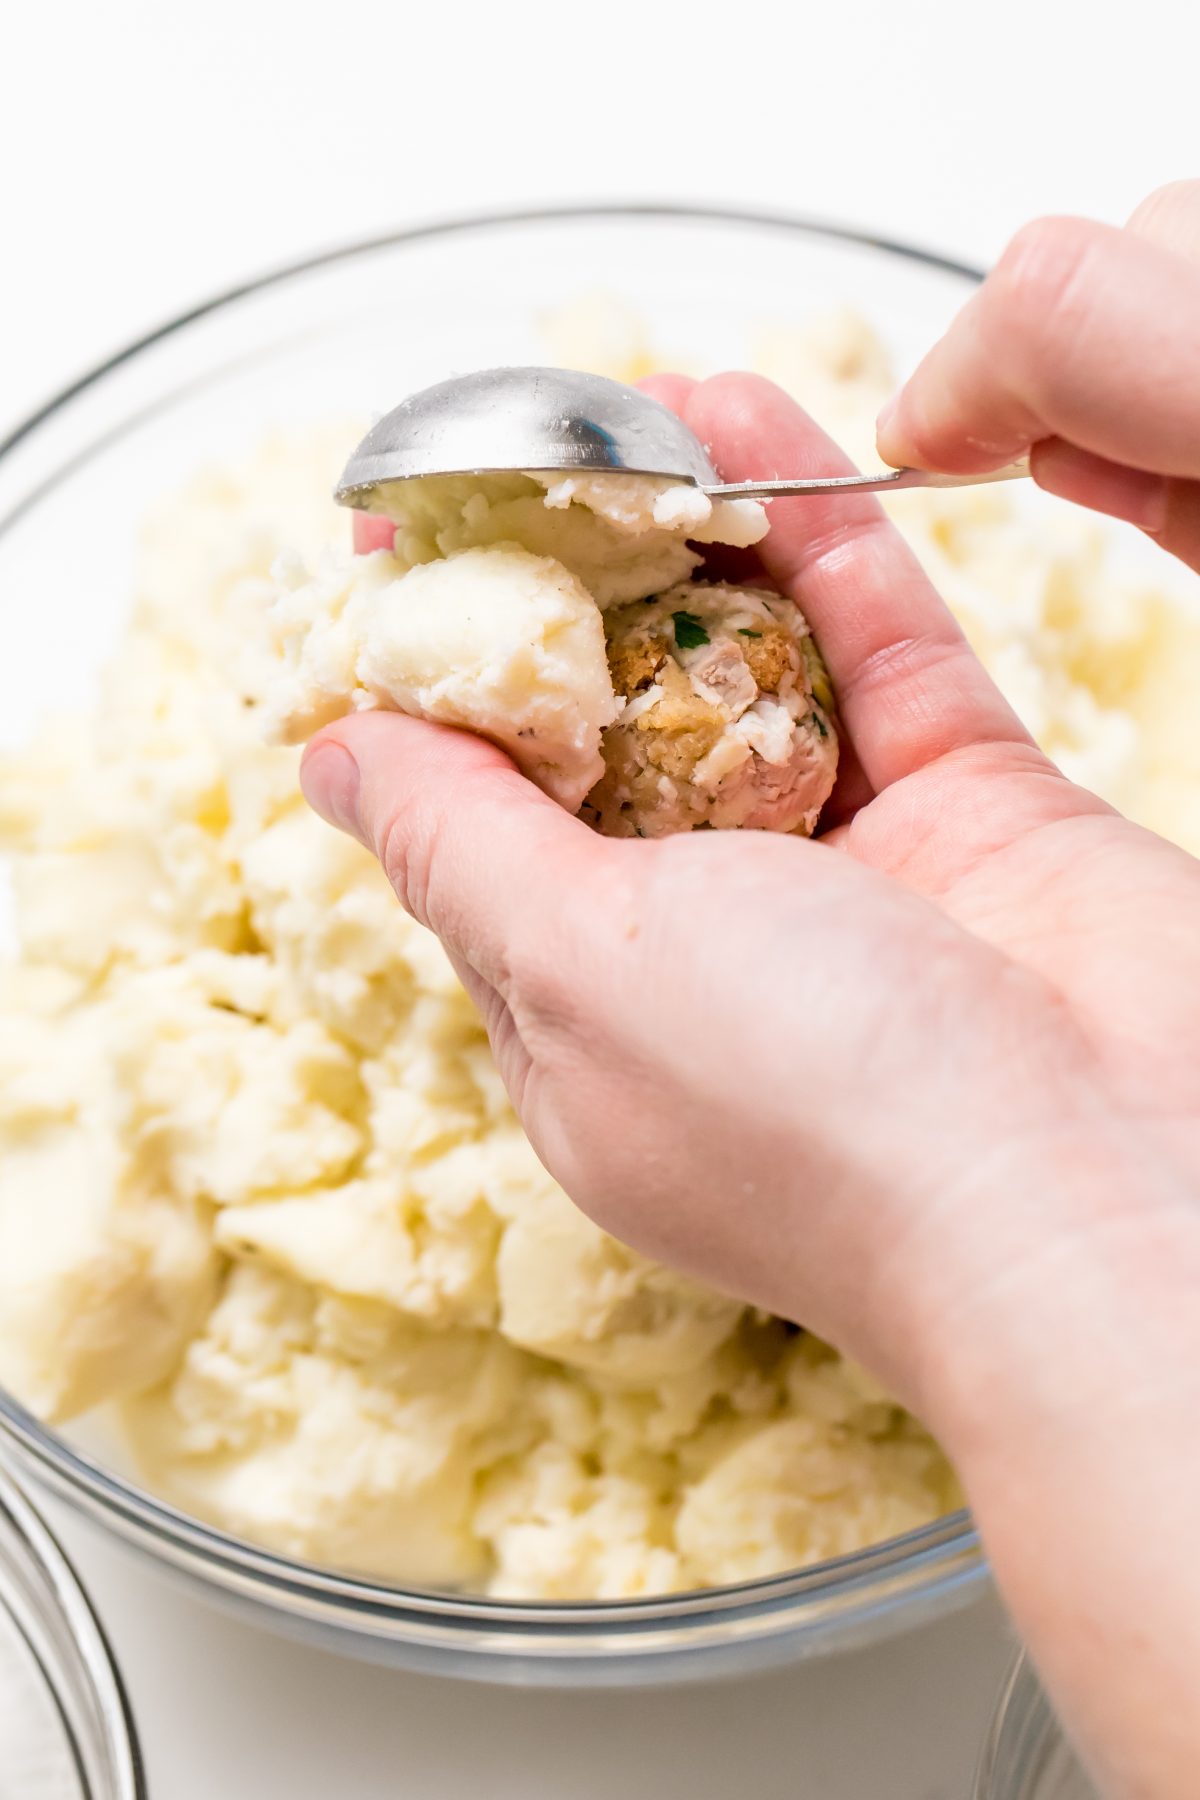 Wrap the turkey balls with leftover mashed potatoes